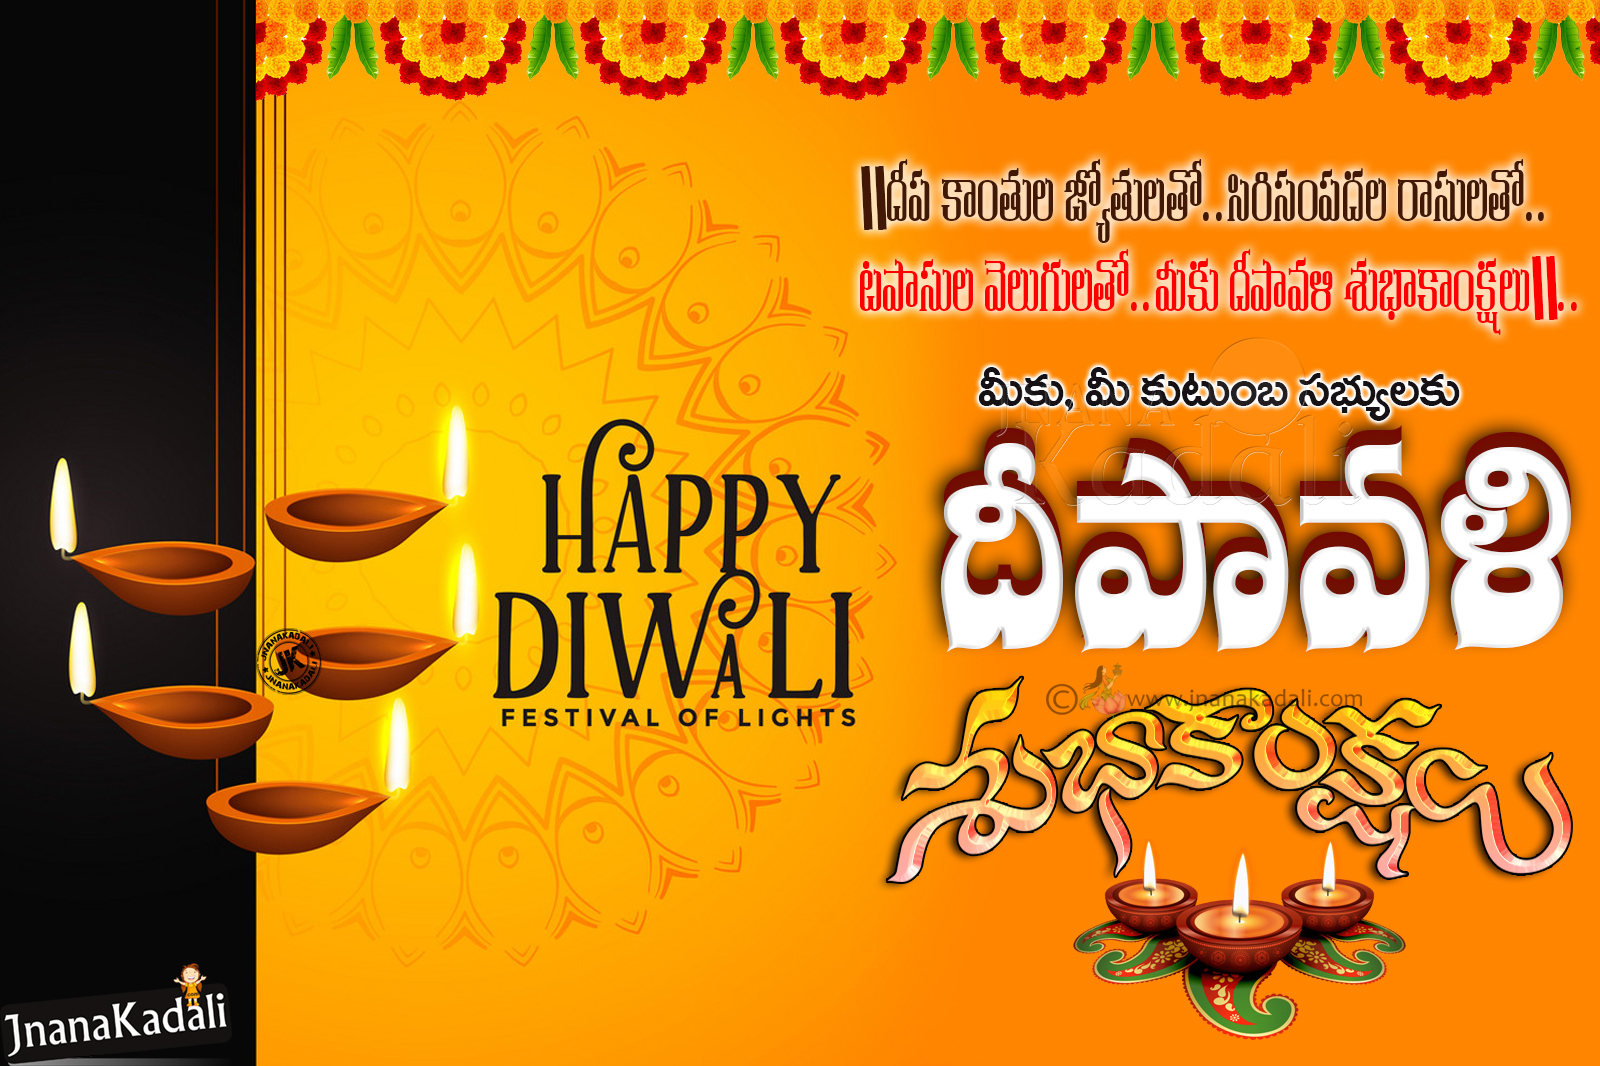 Telugu Deepavali Wishes Free download For Whats App Sharing ...